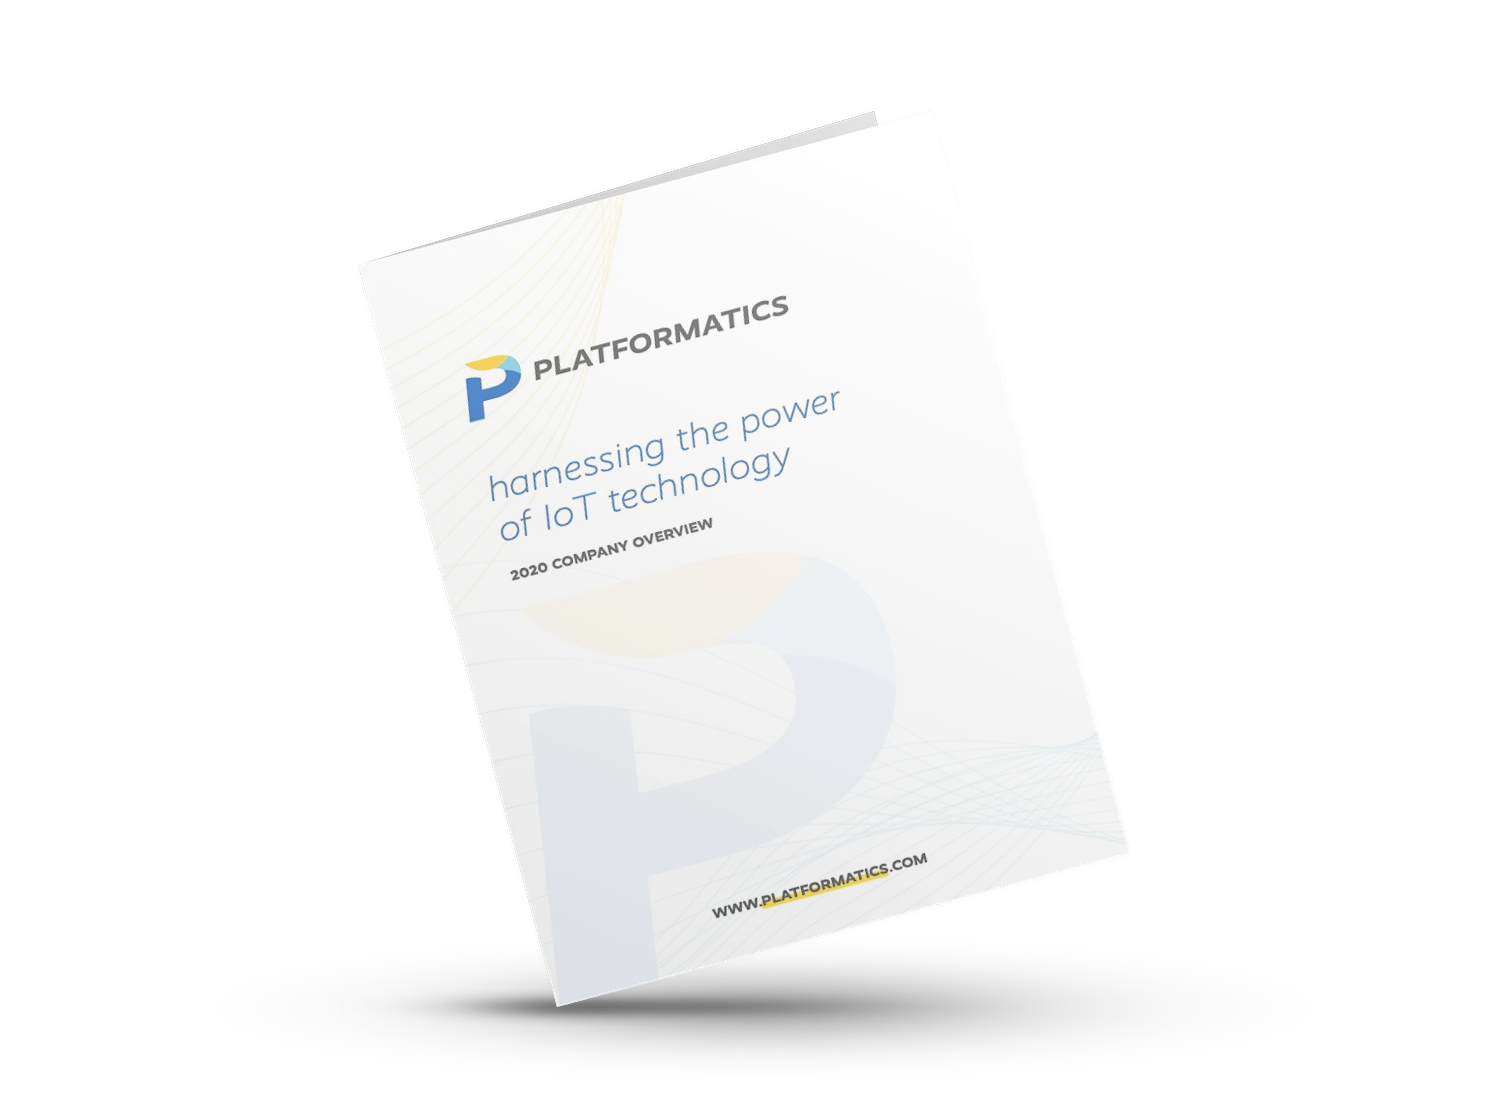 Front of the corporate Platformatics brochure; harnessing the power of IoT technology